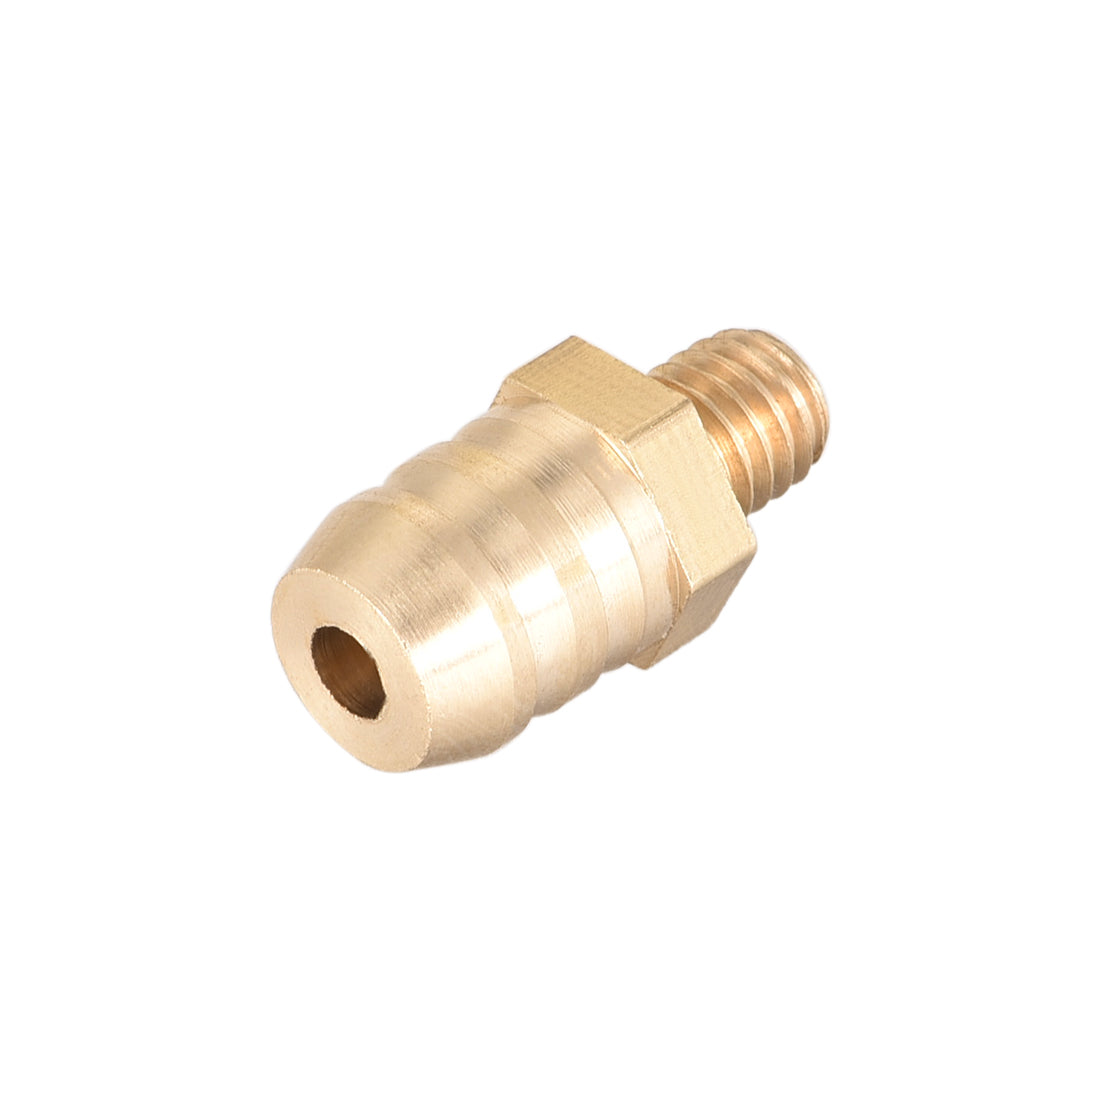 Uxcell Uxcell Brass Fitting Connector Metric M10-1.5 Male to Barb Fit Hose ID 10mm 4pcs